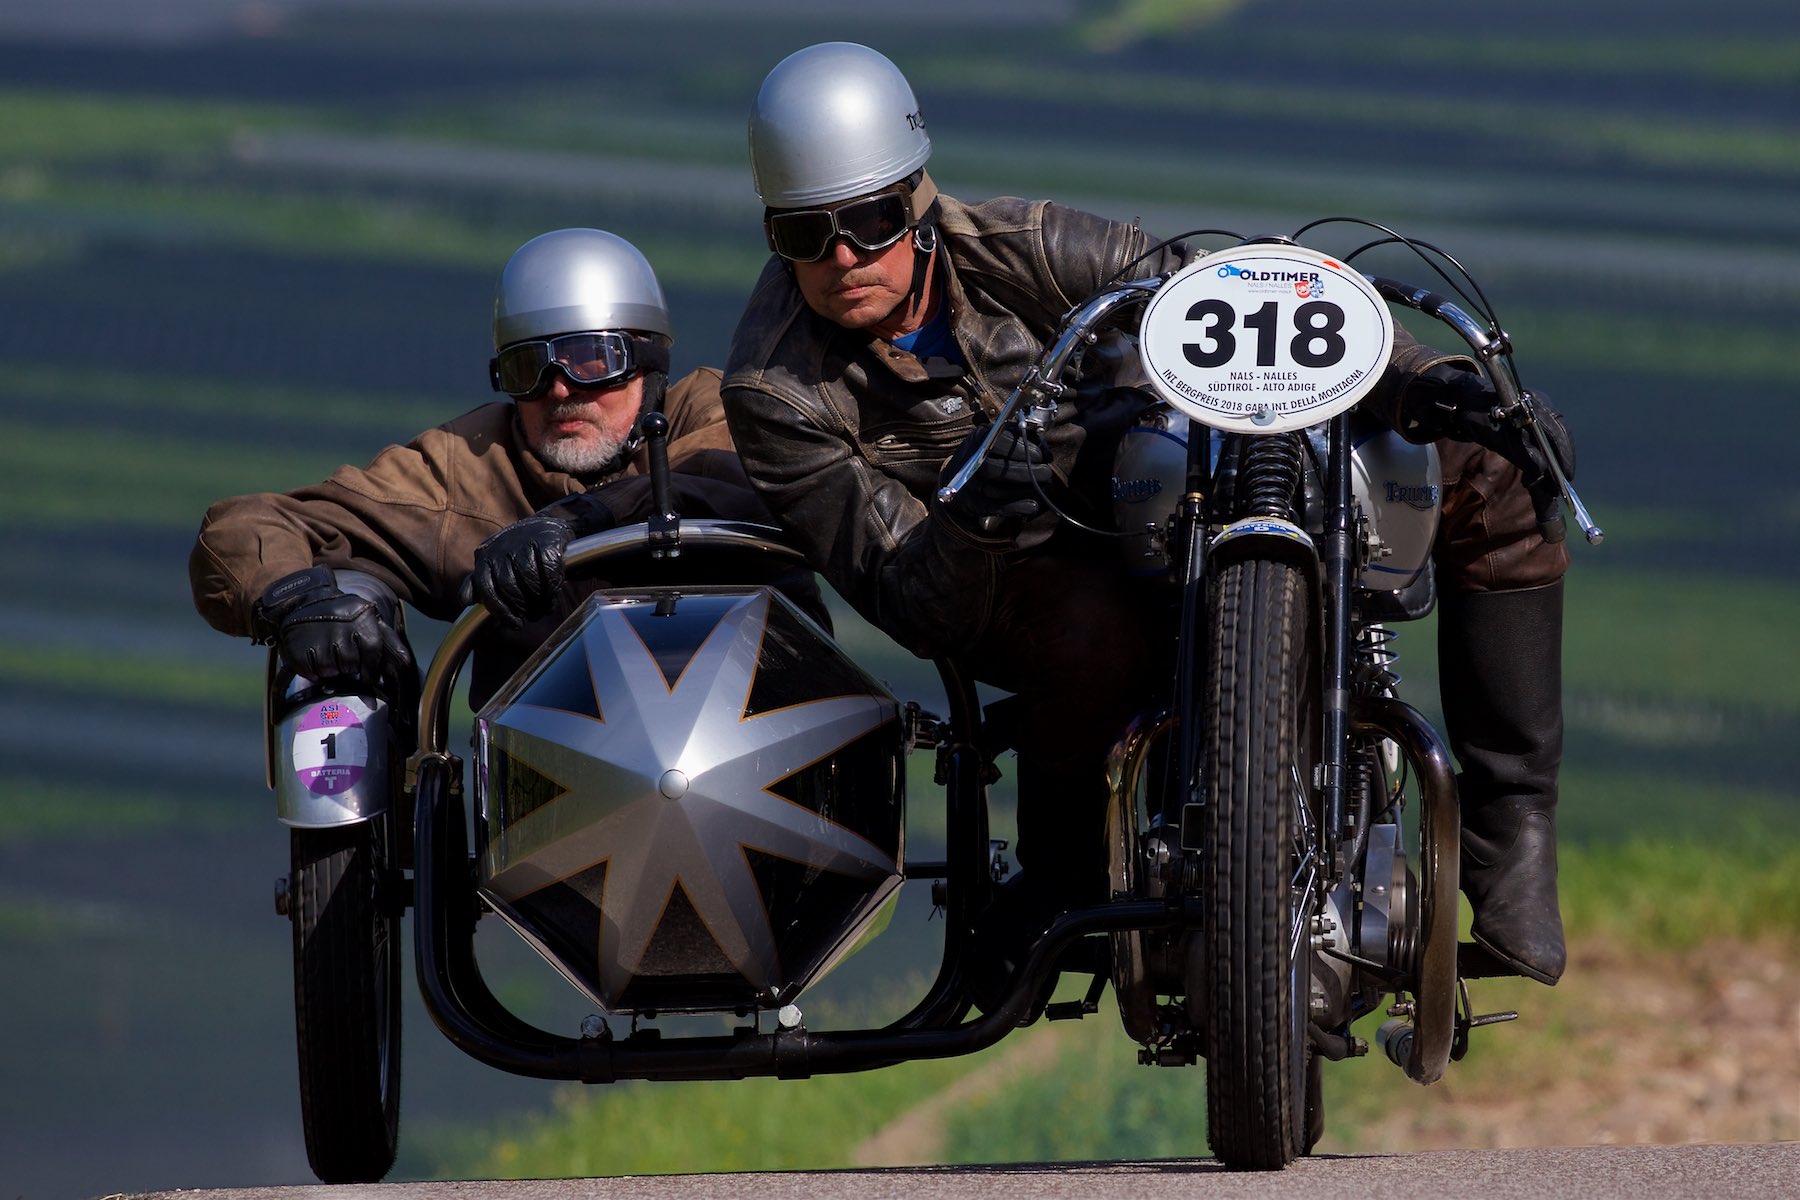 Old Timer Motorcycle Races, Nals, South Tyrol